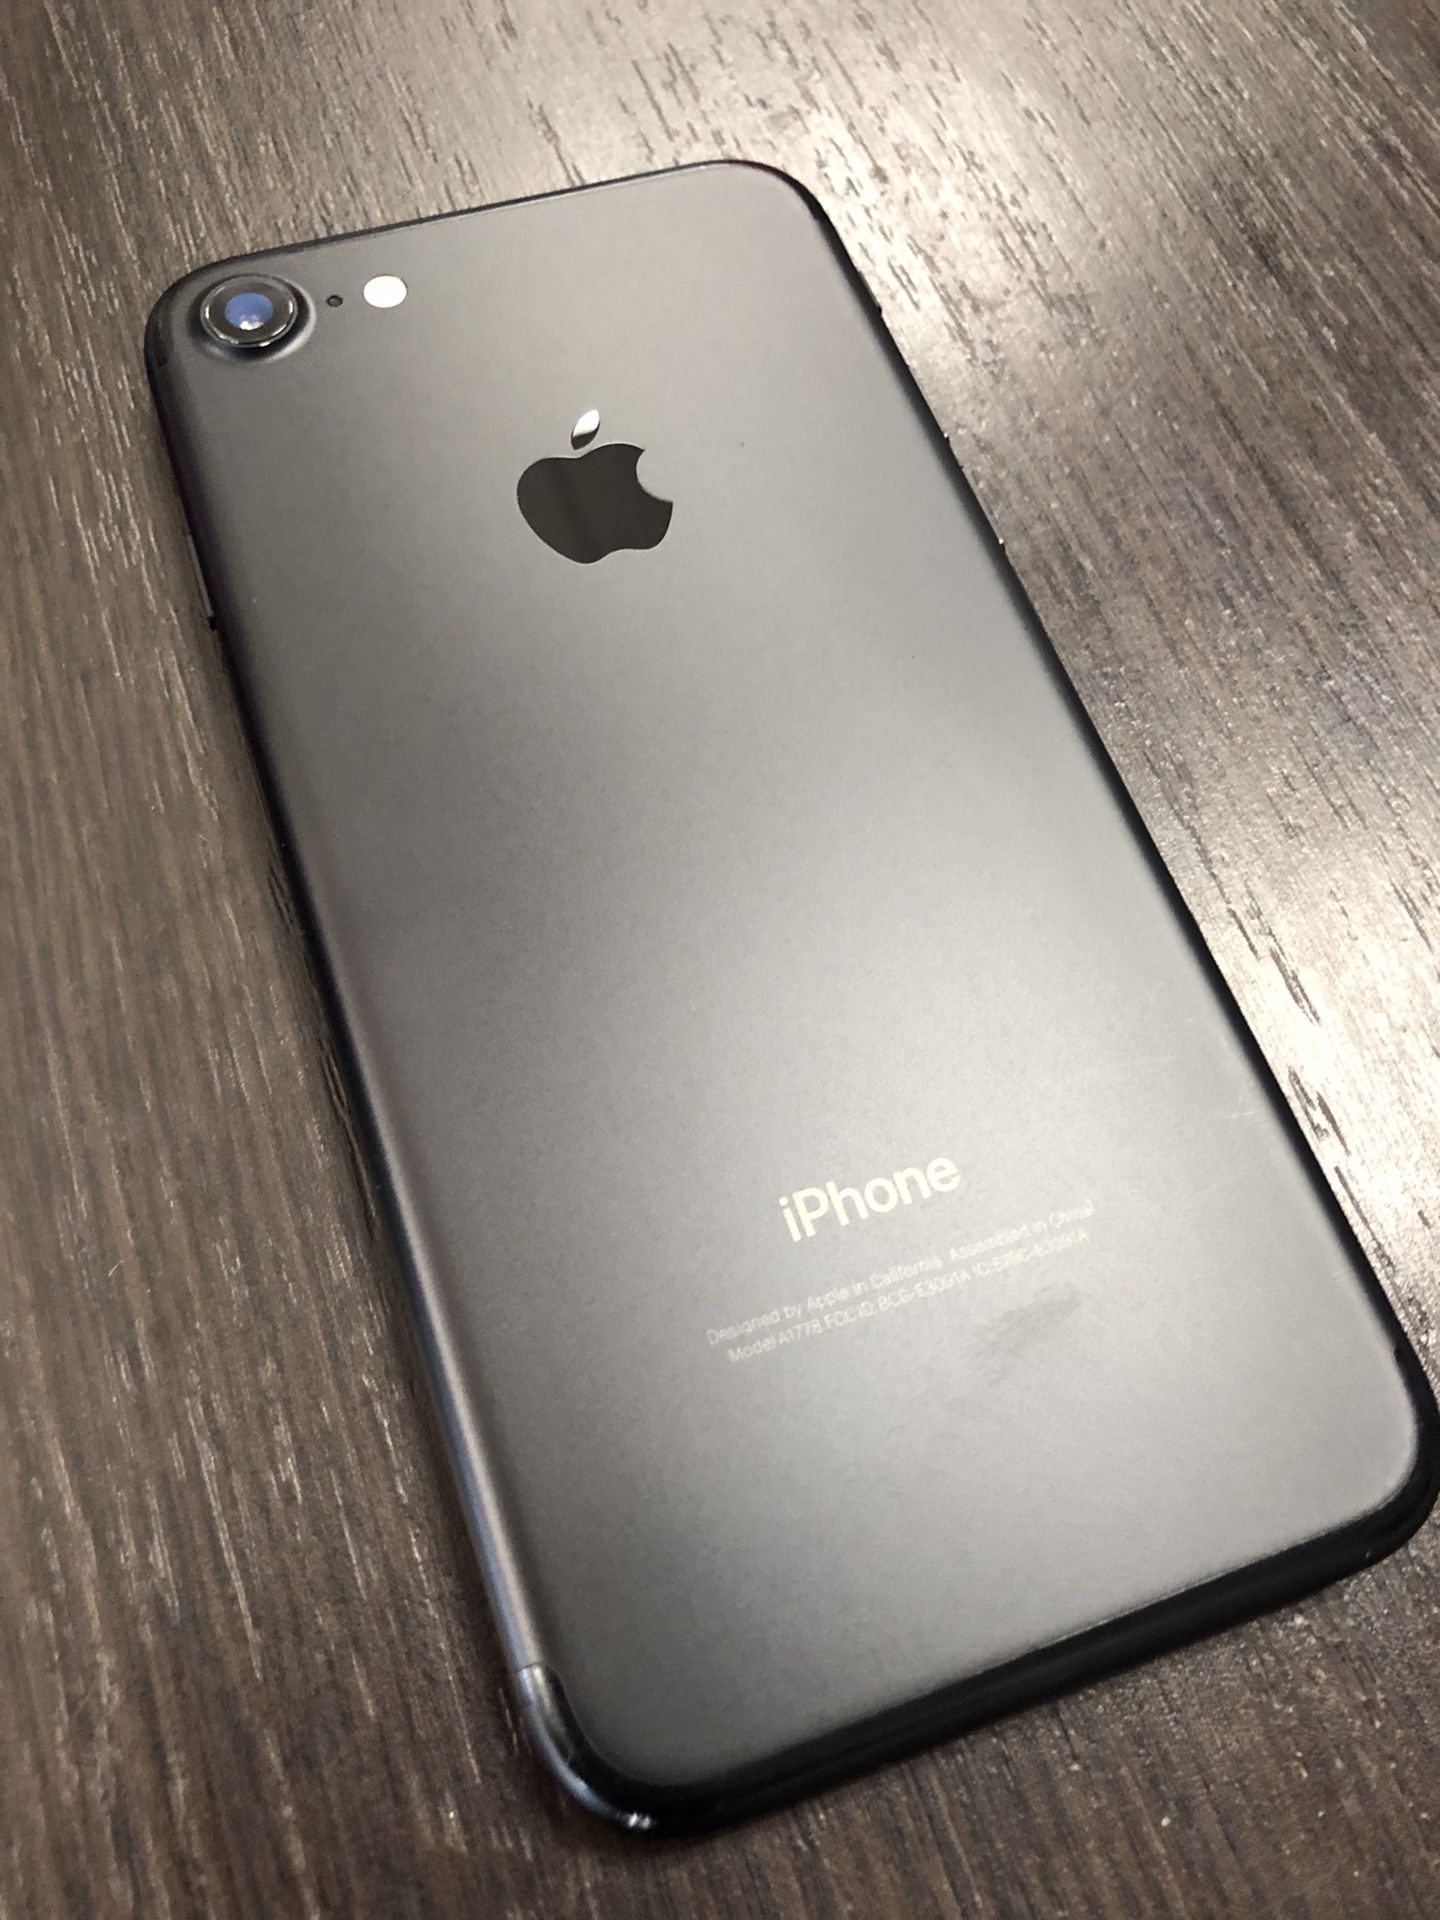 Black iPhone 7 for T-Mobile network